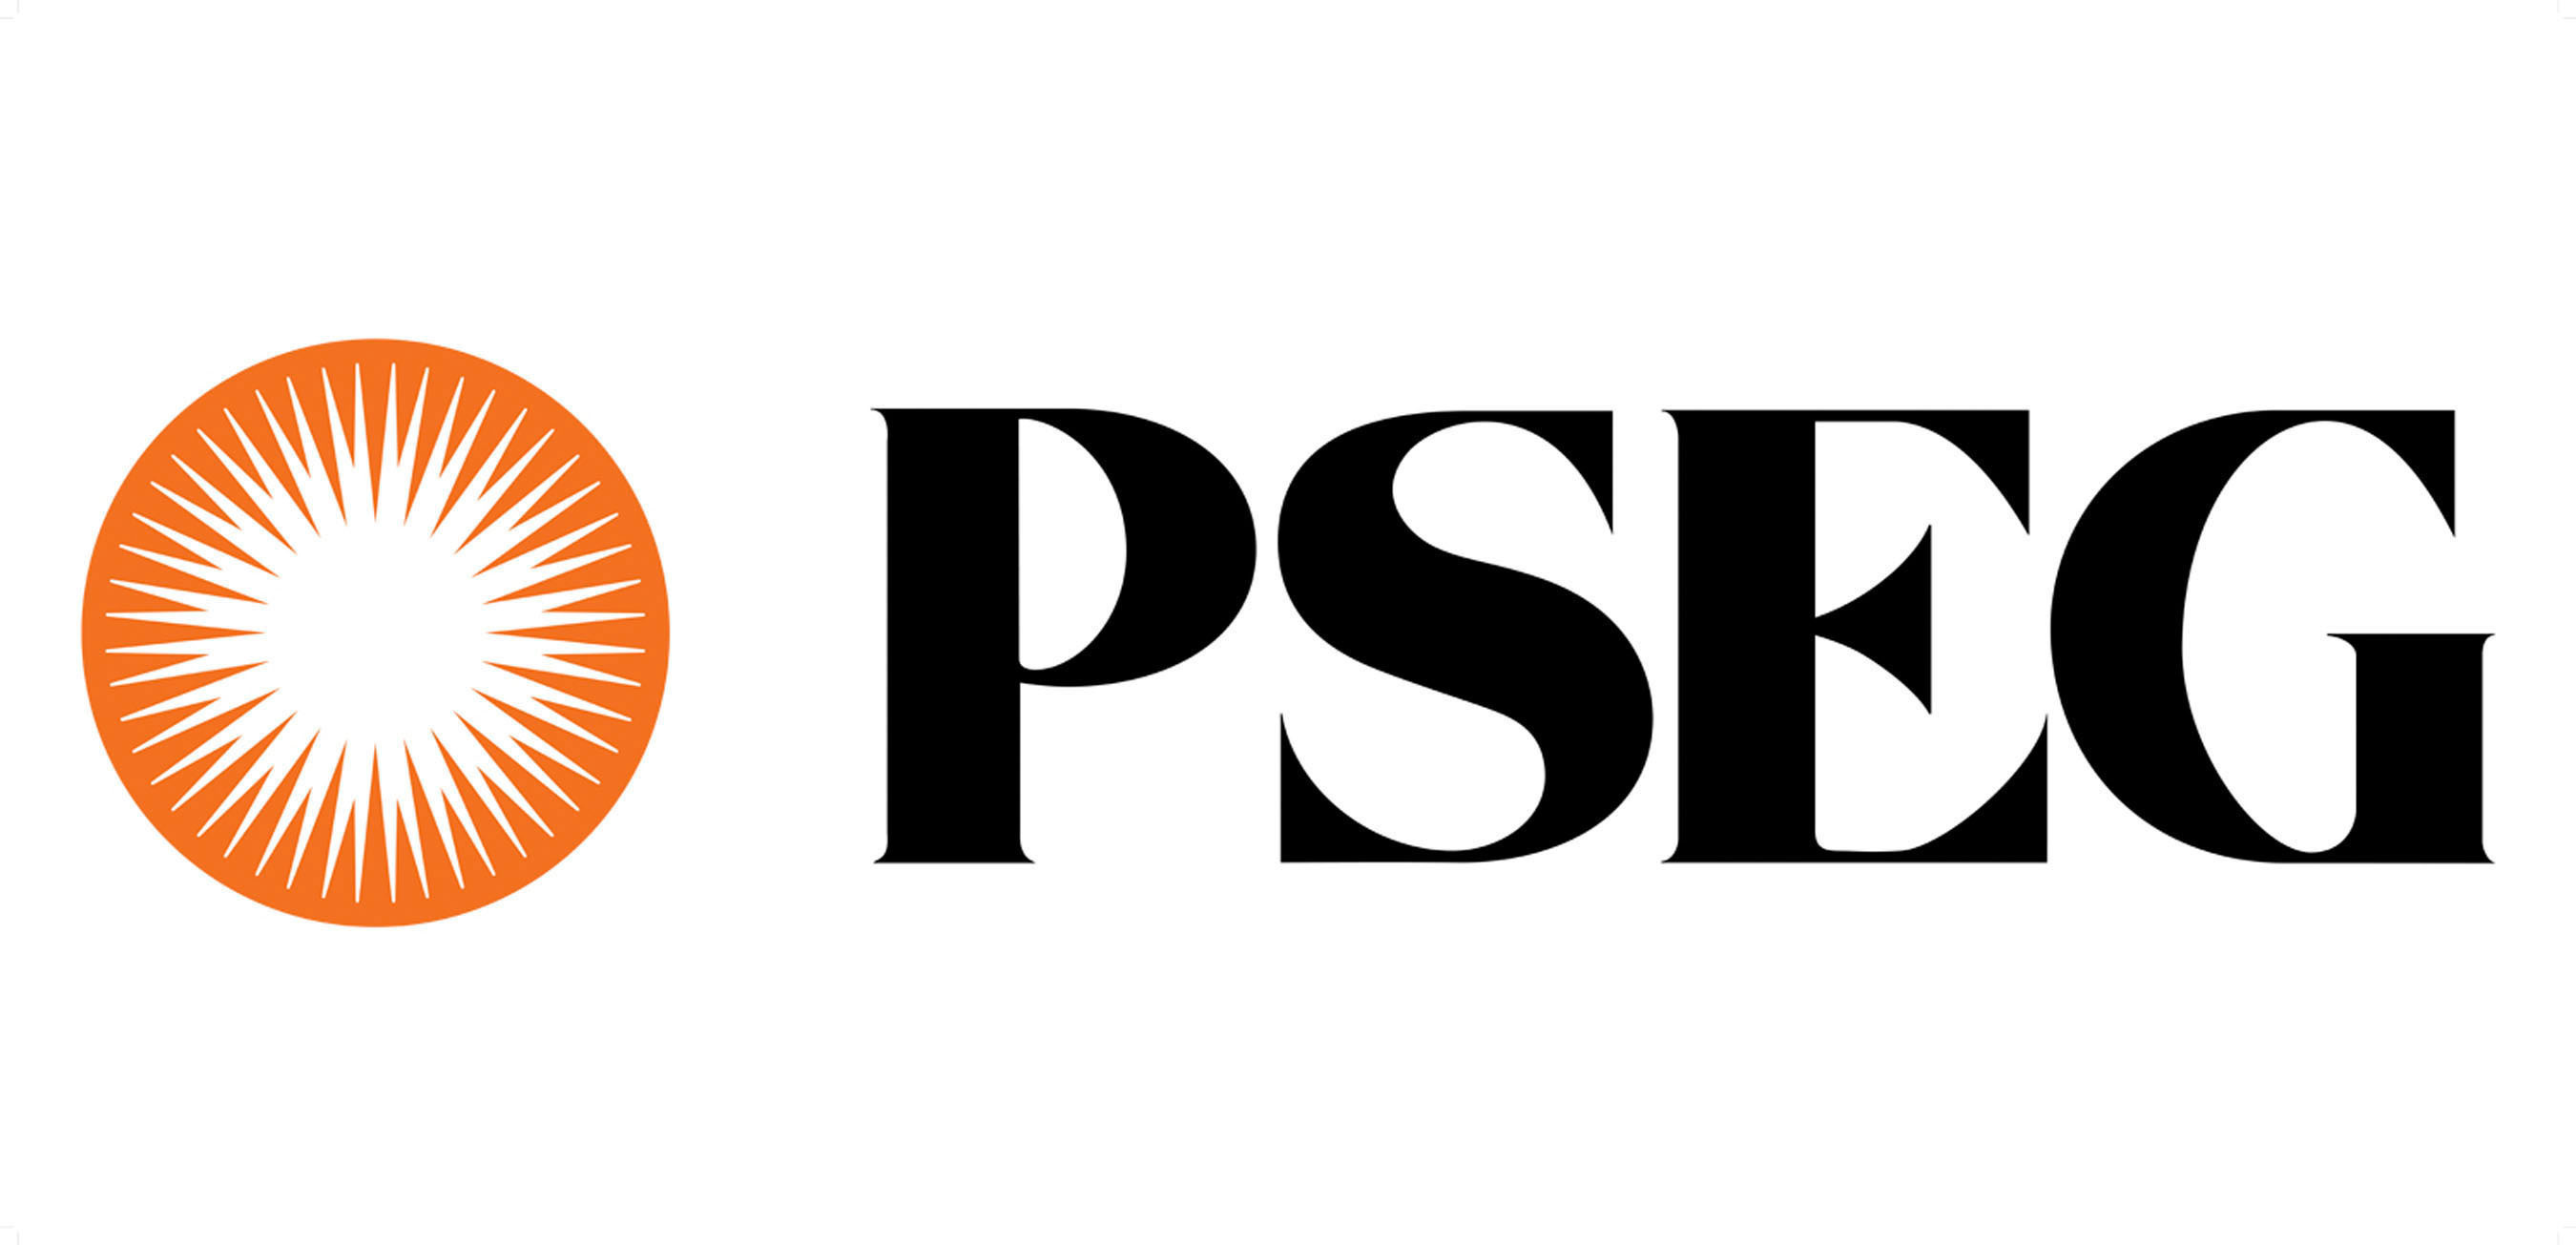 Public Service Enterprise Group (PSEG) is a publicly traded diversified energy company. Its operating subsidiaries are: PSEG Power, Public Service Electric and Gas Company (PSE&G) and PSEG Long Island. (PRNewsFoto/PUBLIC SERVICE ENTERPRISE GROUP)